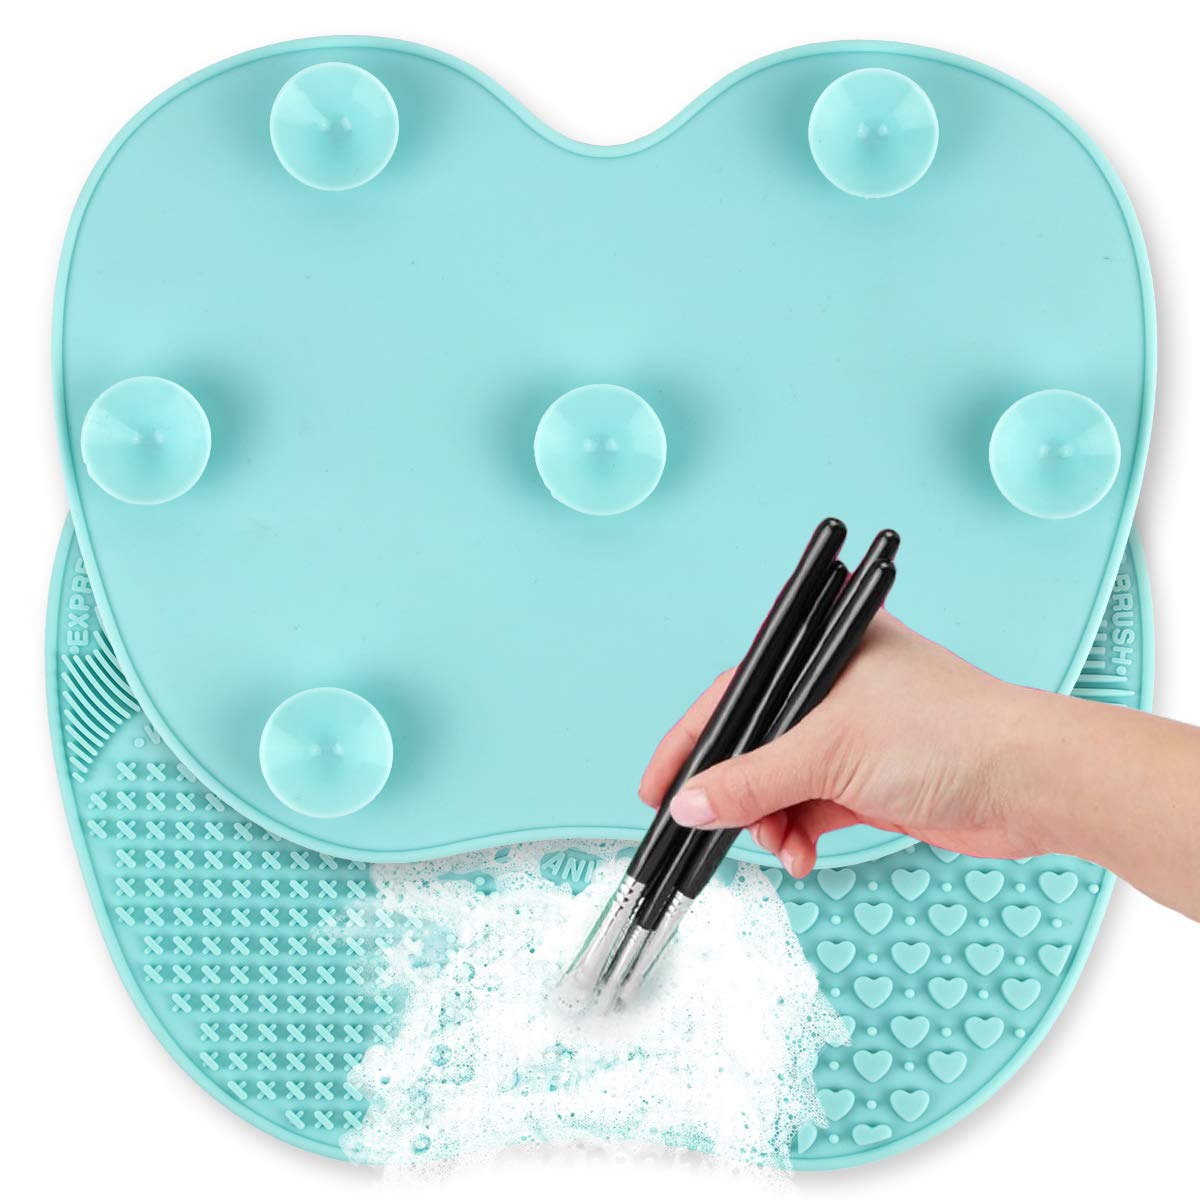 Foldable Sink Cover - Silicone Beauty Makeup Brush Cleaning Mat